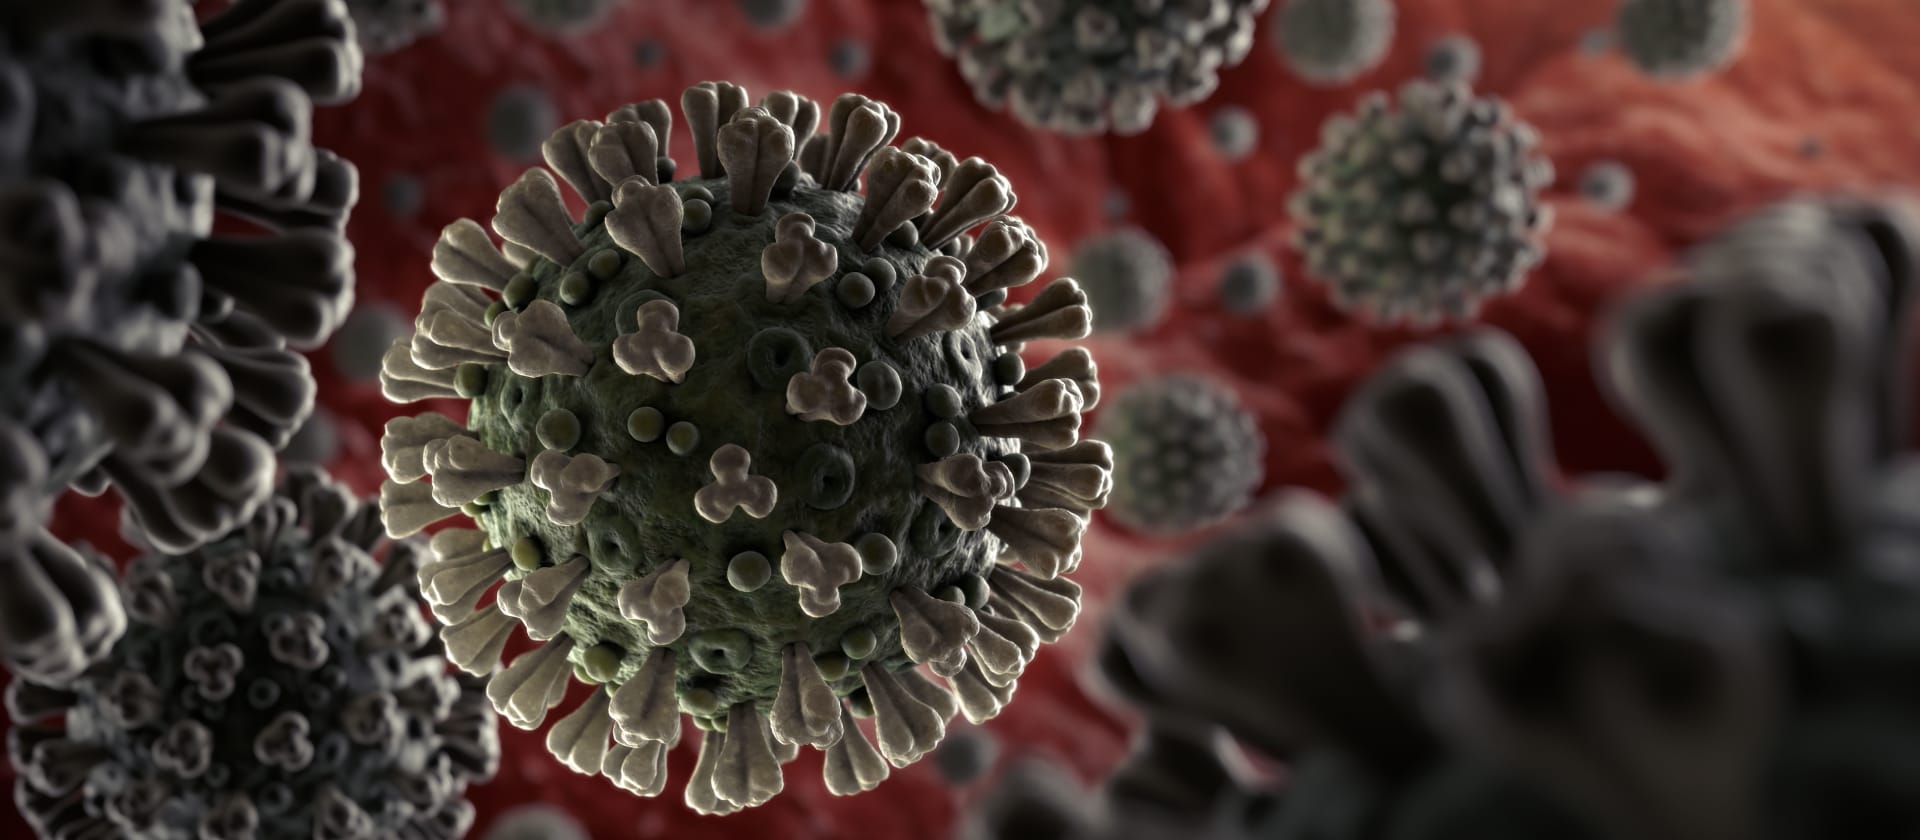 Telemedicine and the coronavirus: what you need to know.